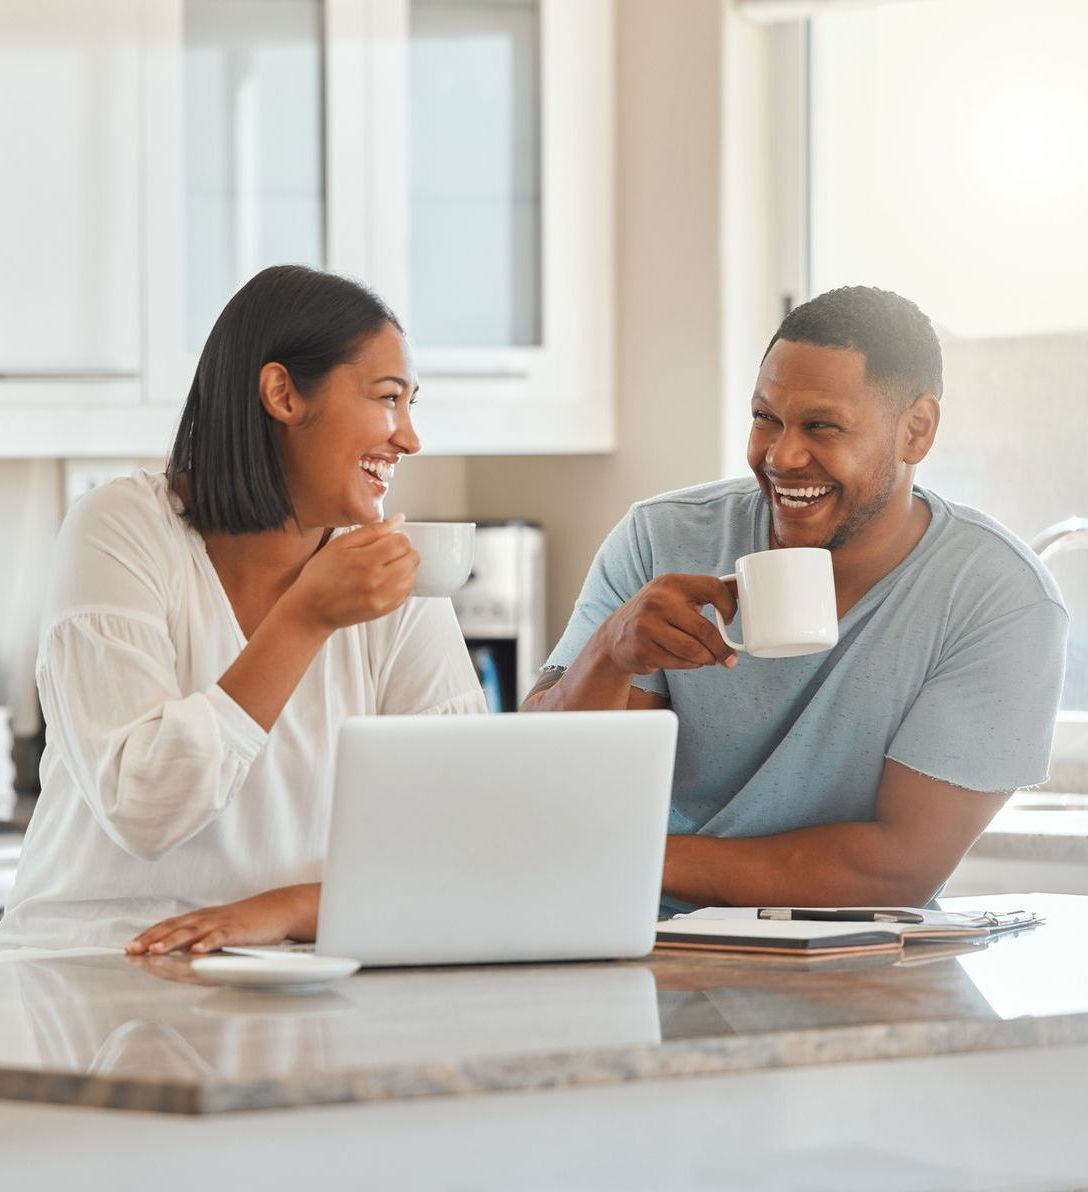 A man and a woman are sitting at a table with a laptop and drinking coffee.